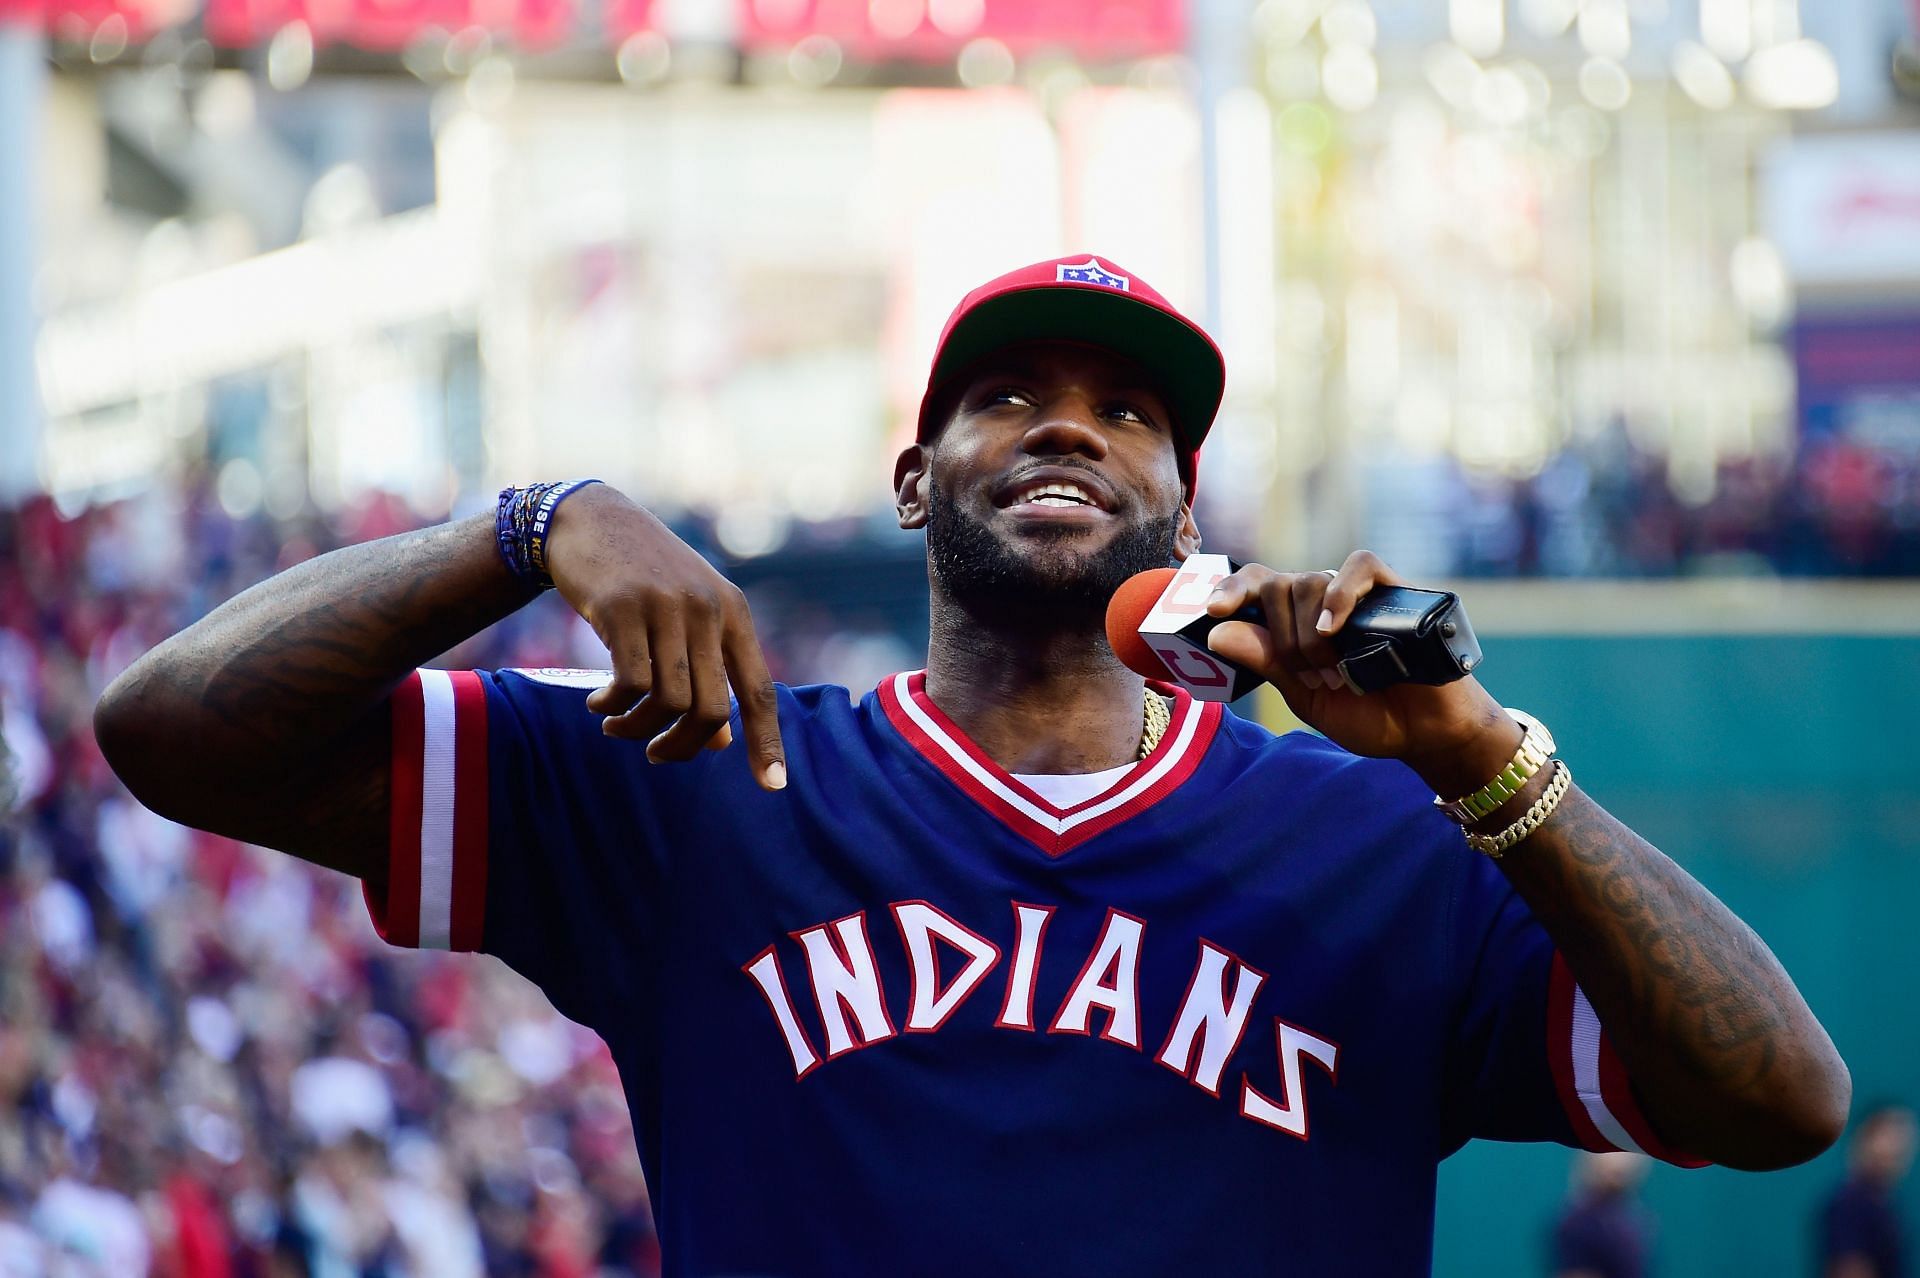 LeBron James No. 23 addresses the crowd prior to game two of the American League Divison Series between the Boston Red Sox and the Cleveland Indians.